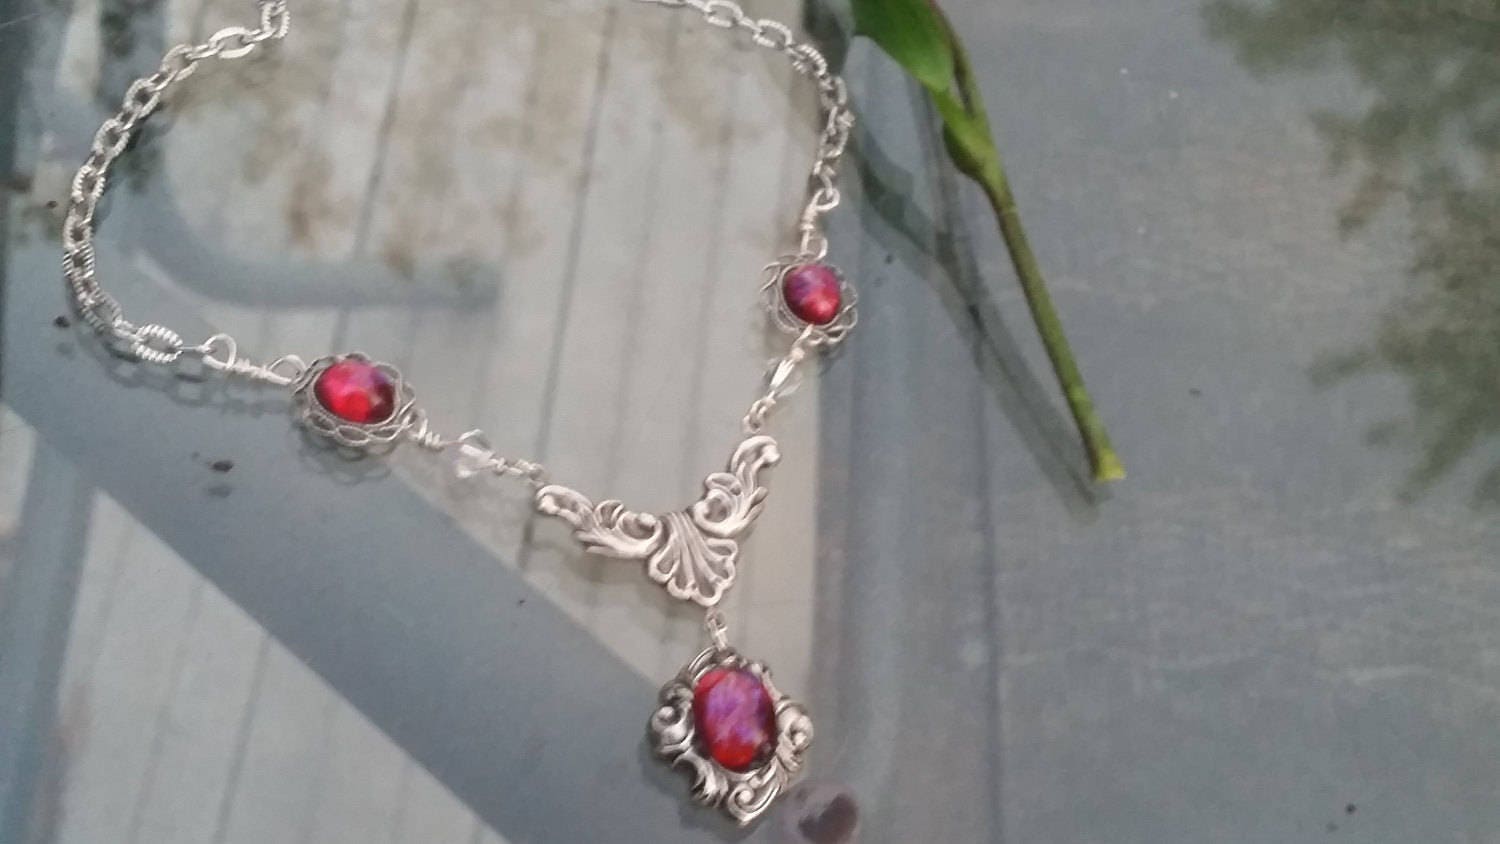 Medieval Dragon Breath Necklace with Swarovski Links, Mexican Fire Opal Necklace, Opal Necklace, Special gifts, Free shipping, Christmas